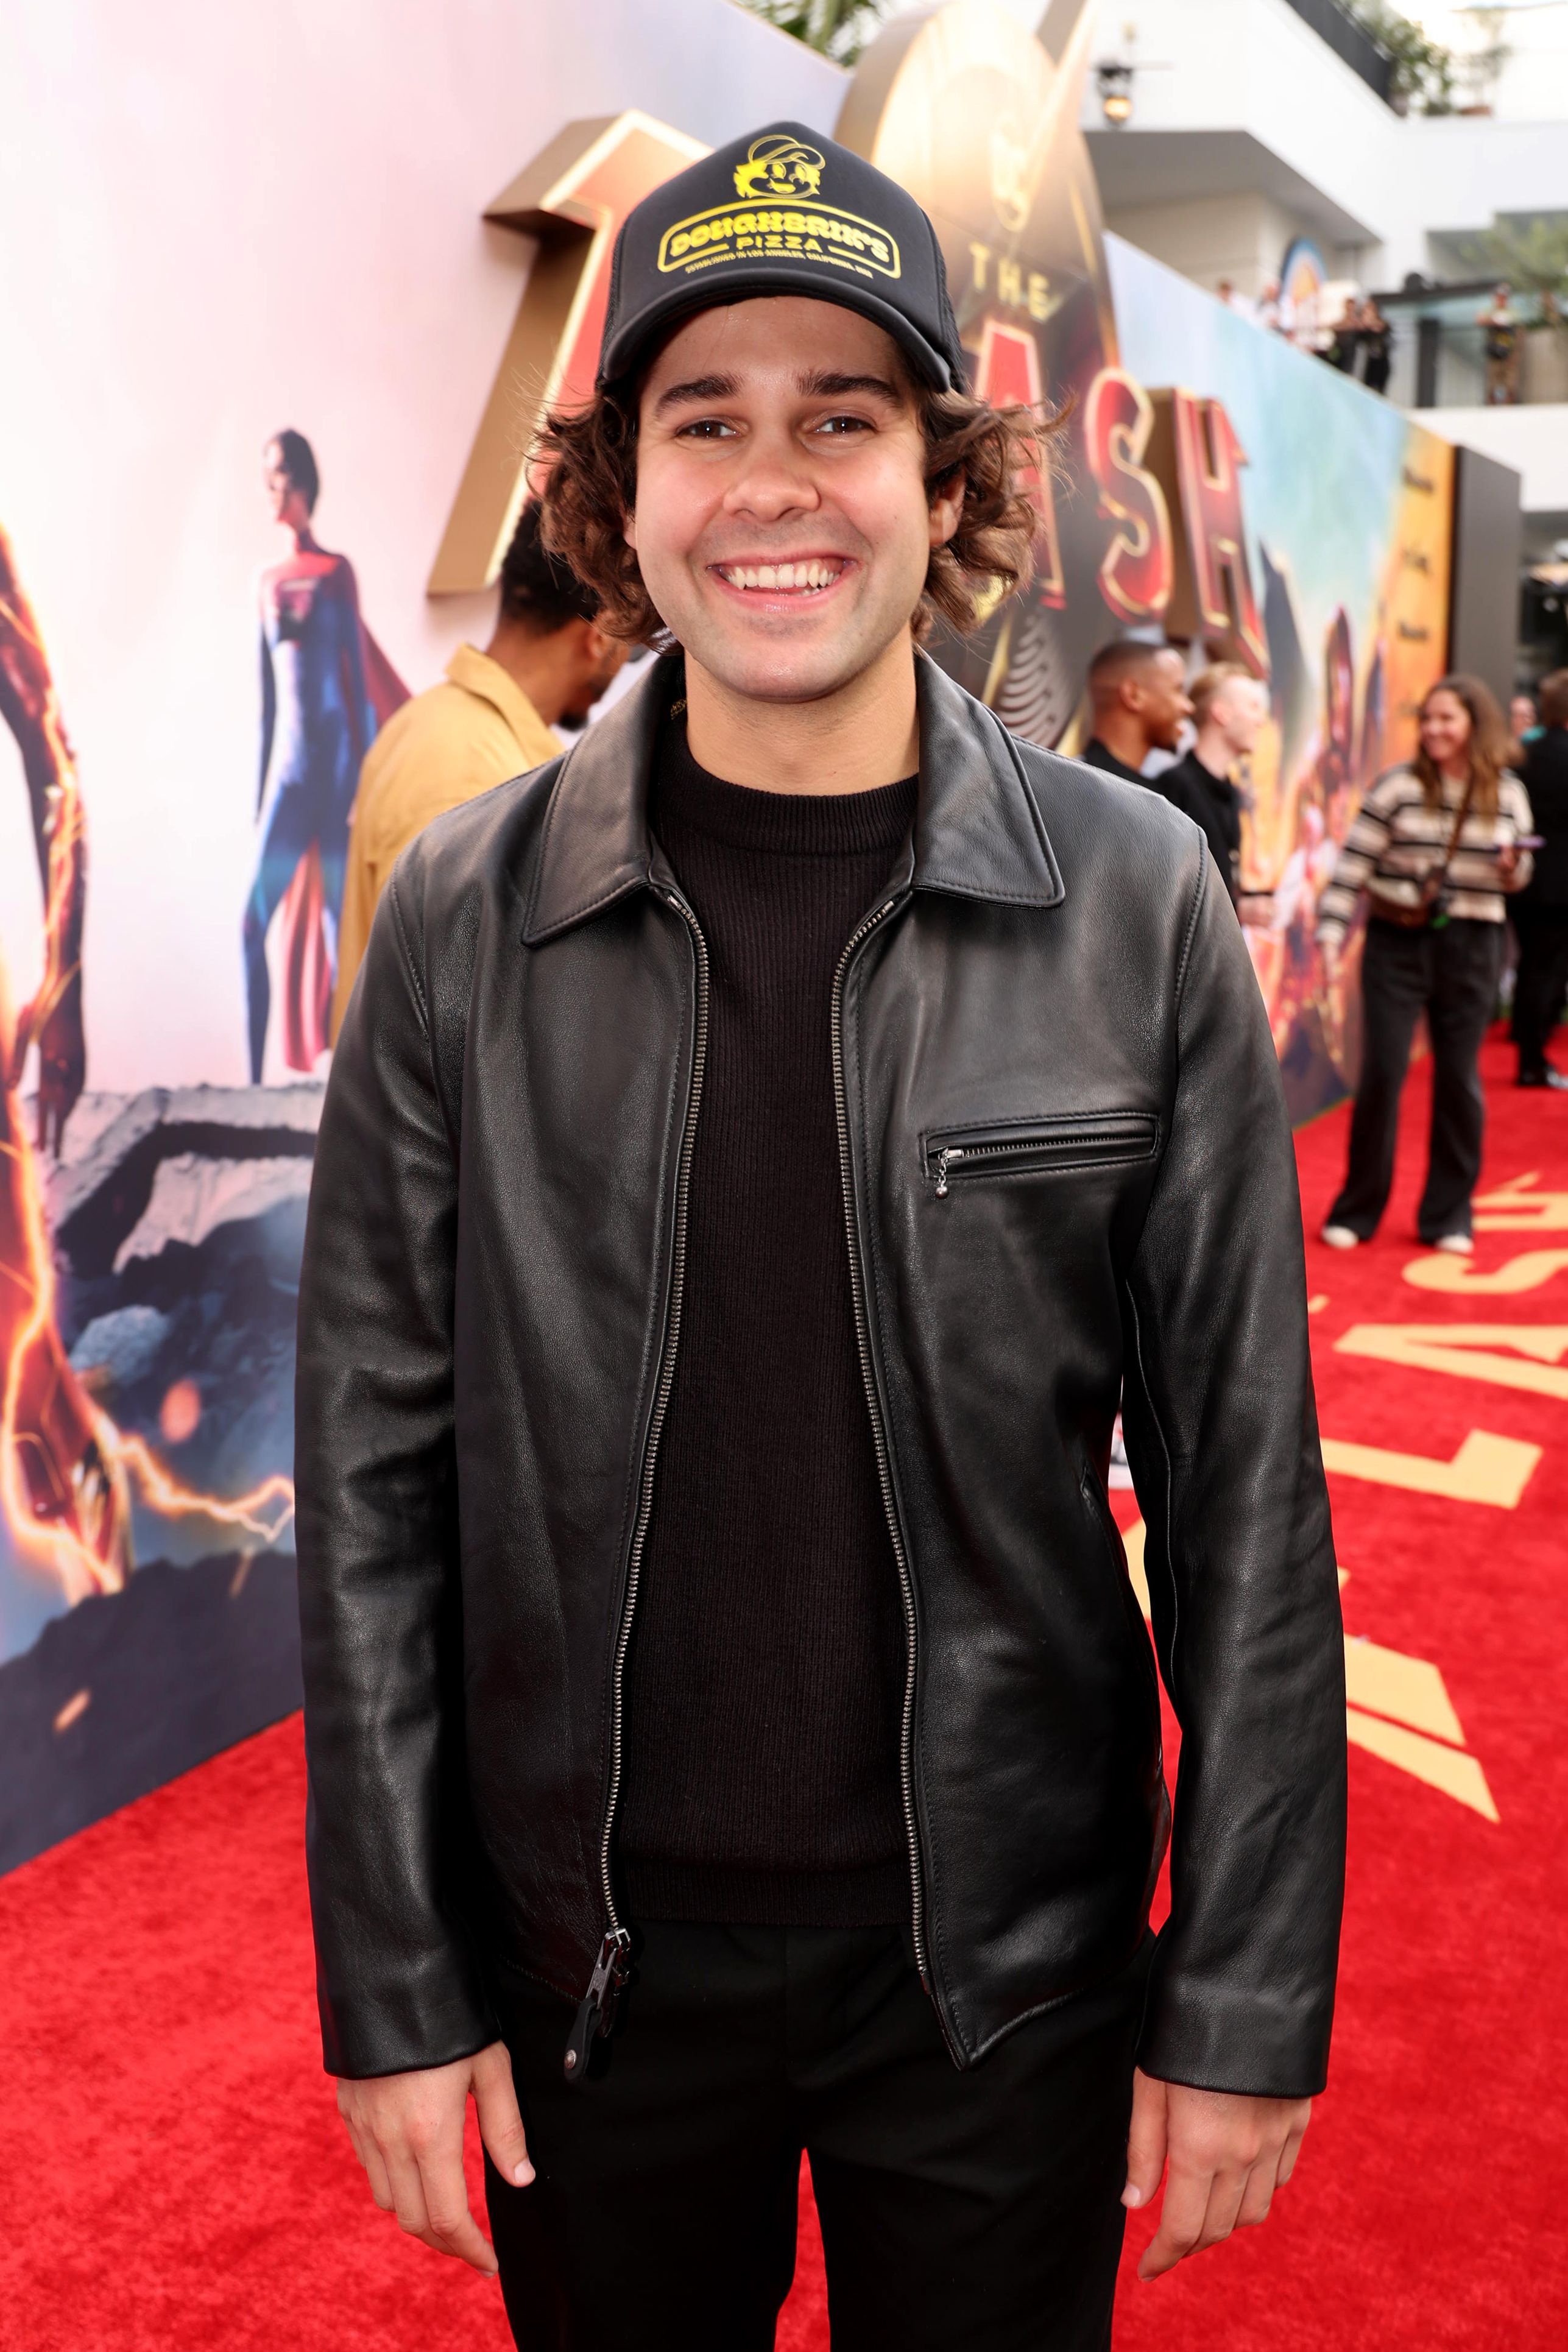 David Dobrik Now What He's Doing After YouTube Fame